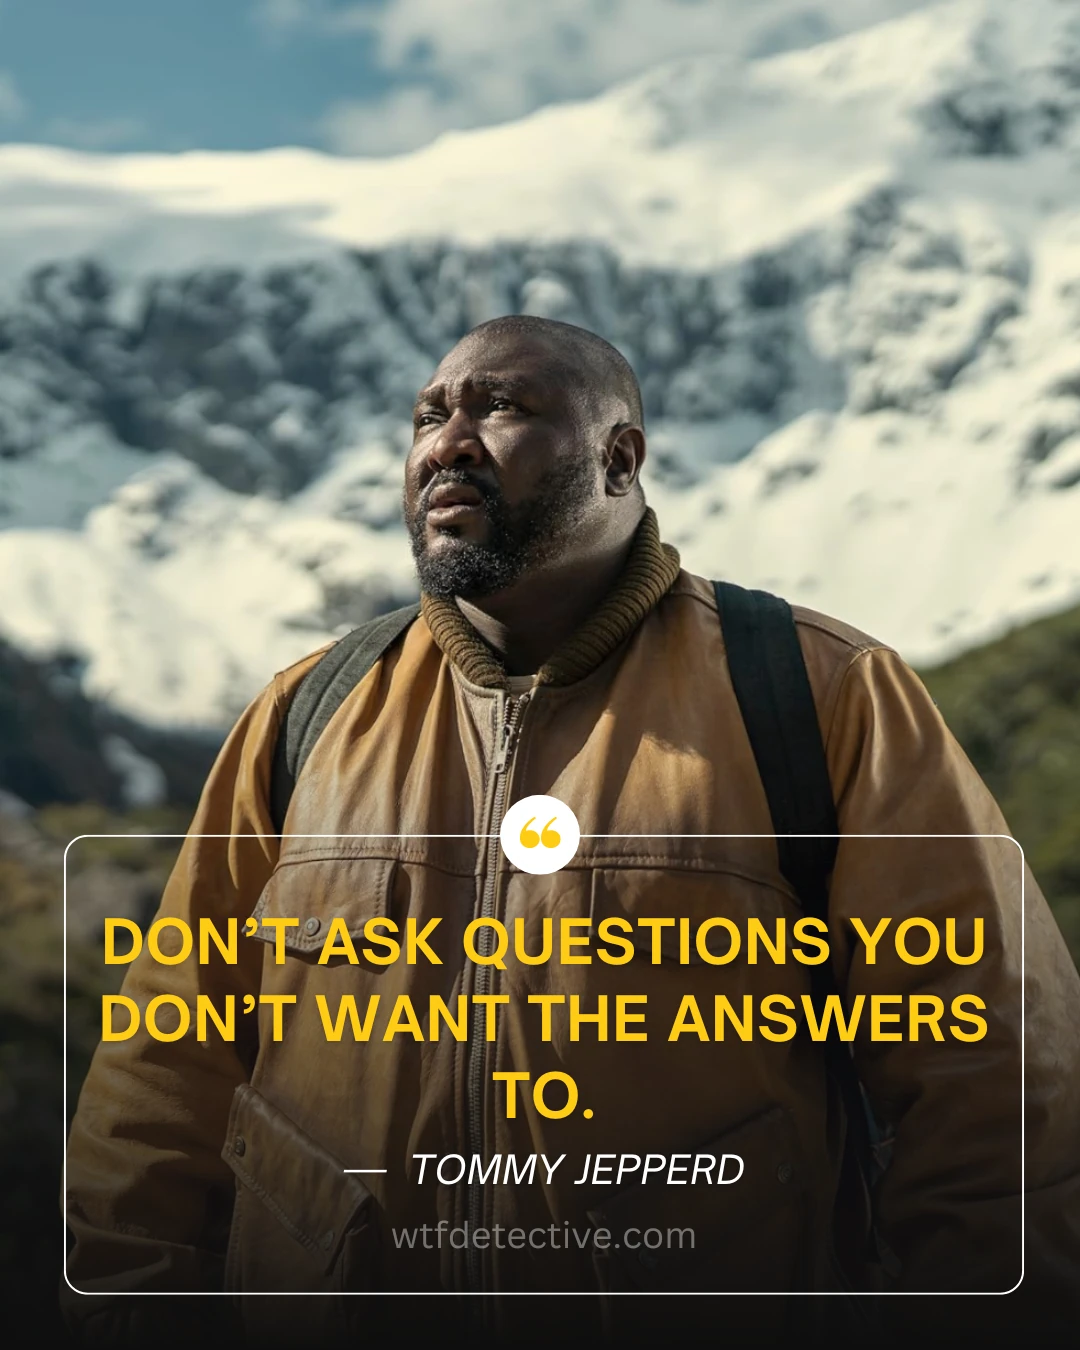 tommy jepperd quotes from sweet tooth, sweet tooth season 3 quotes, Nonso Anozie quote in "Sweet Tooth, dont want answers to